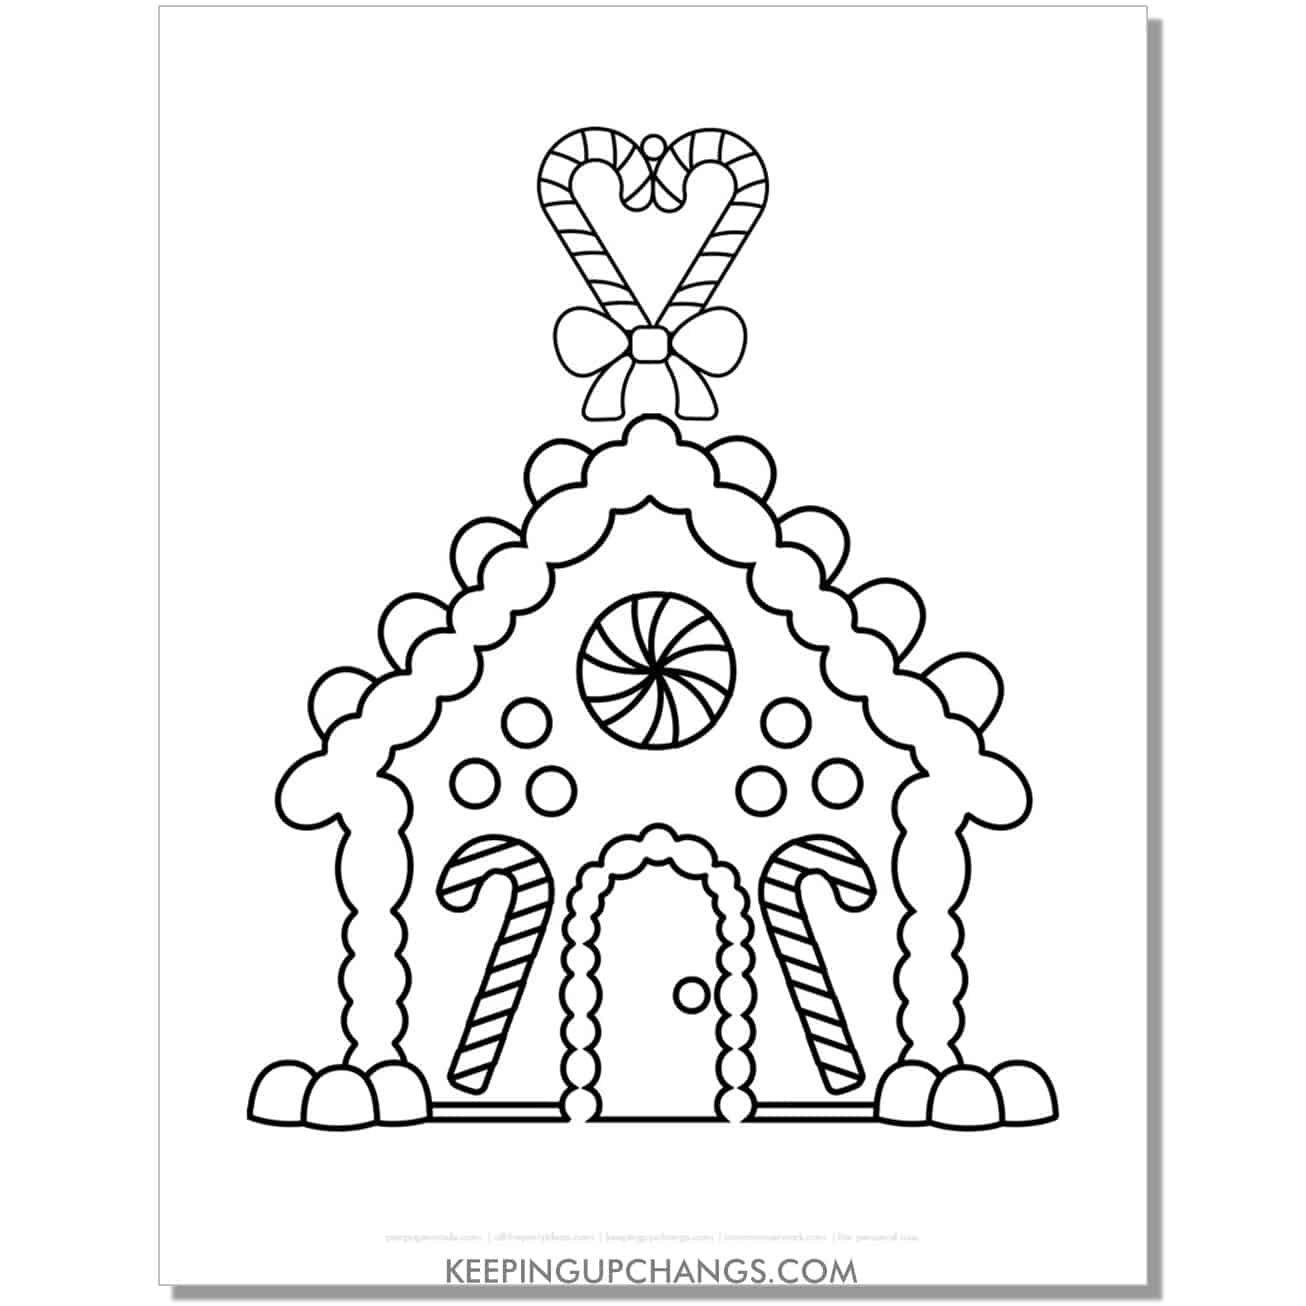 free large, easy gingerbread house coloring page for toddlers, preschool, kindergarten.